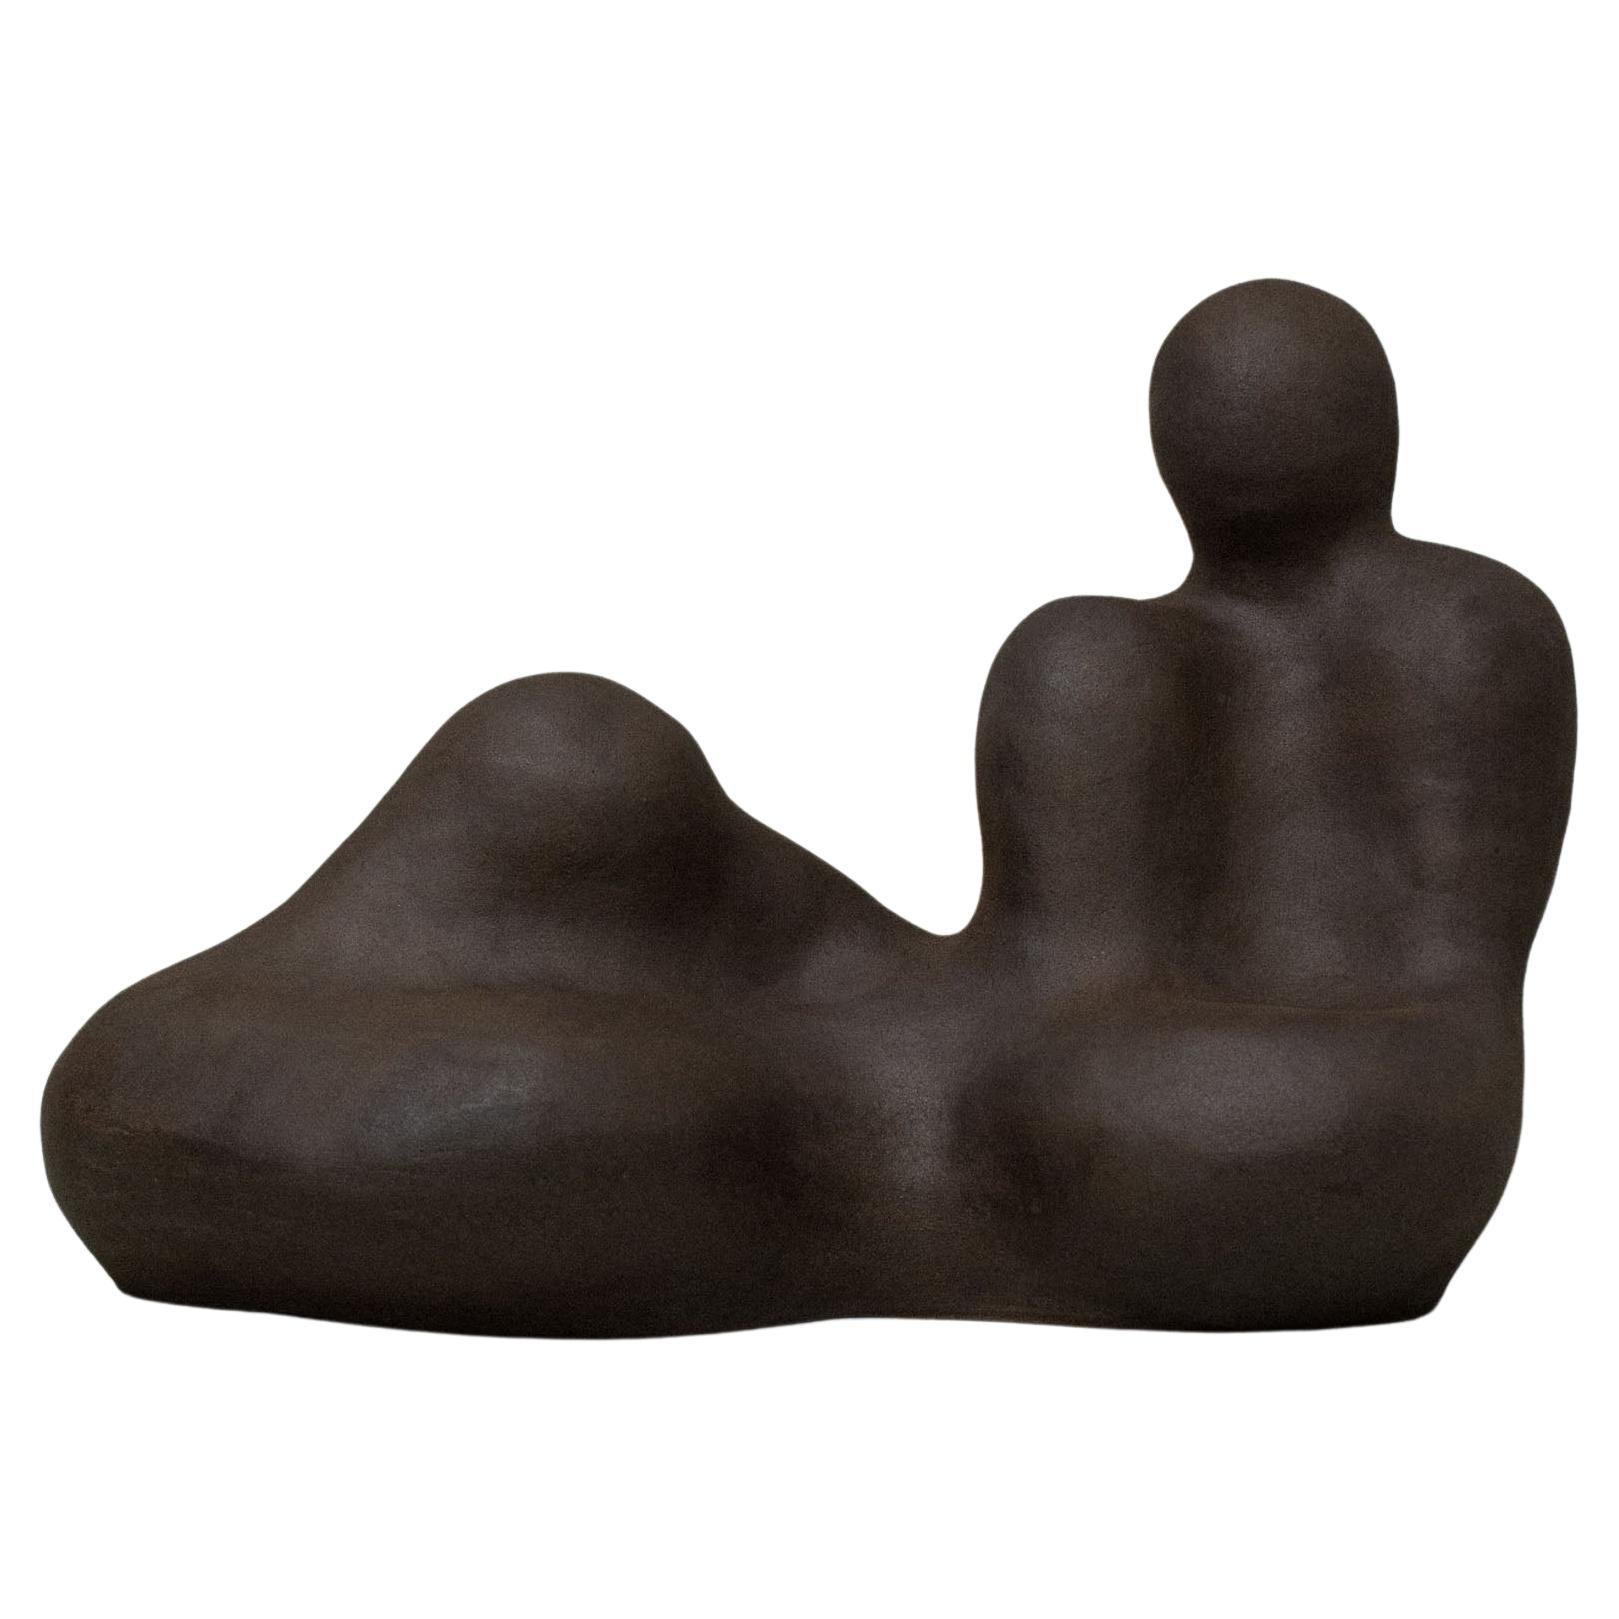 Dark Brown OM Sculpture by Common Body For Sale